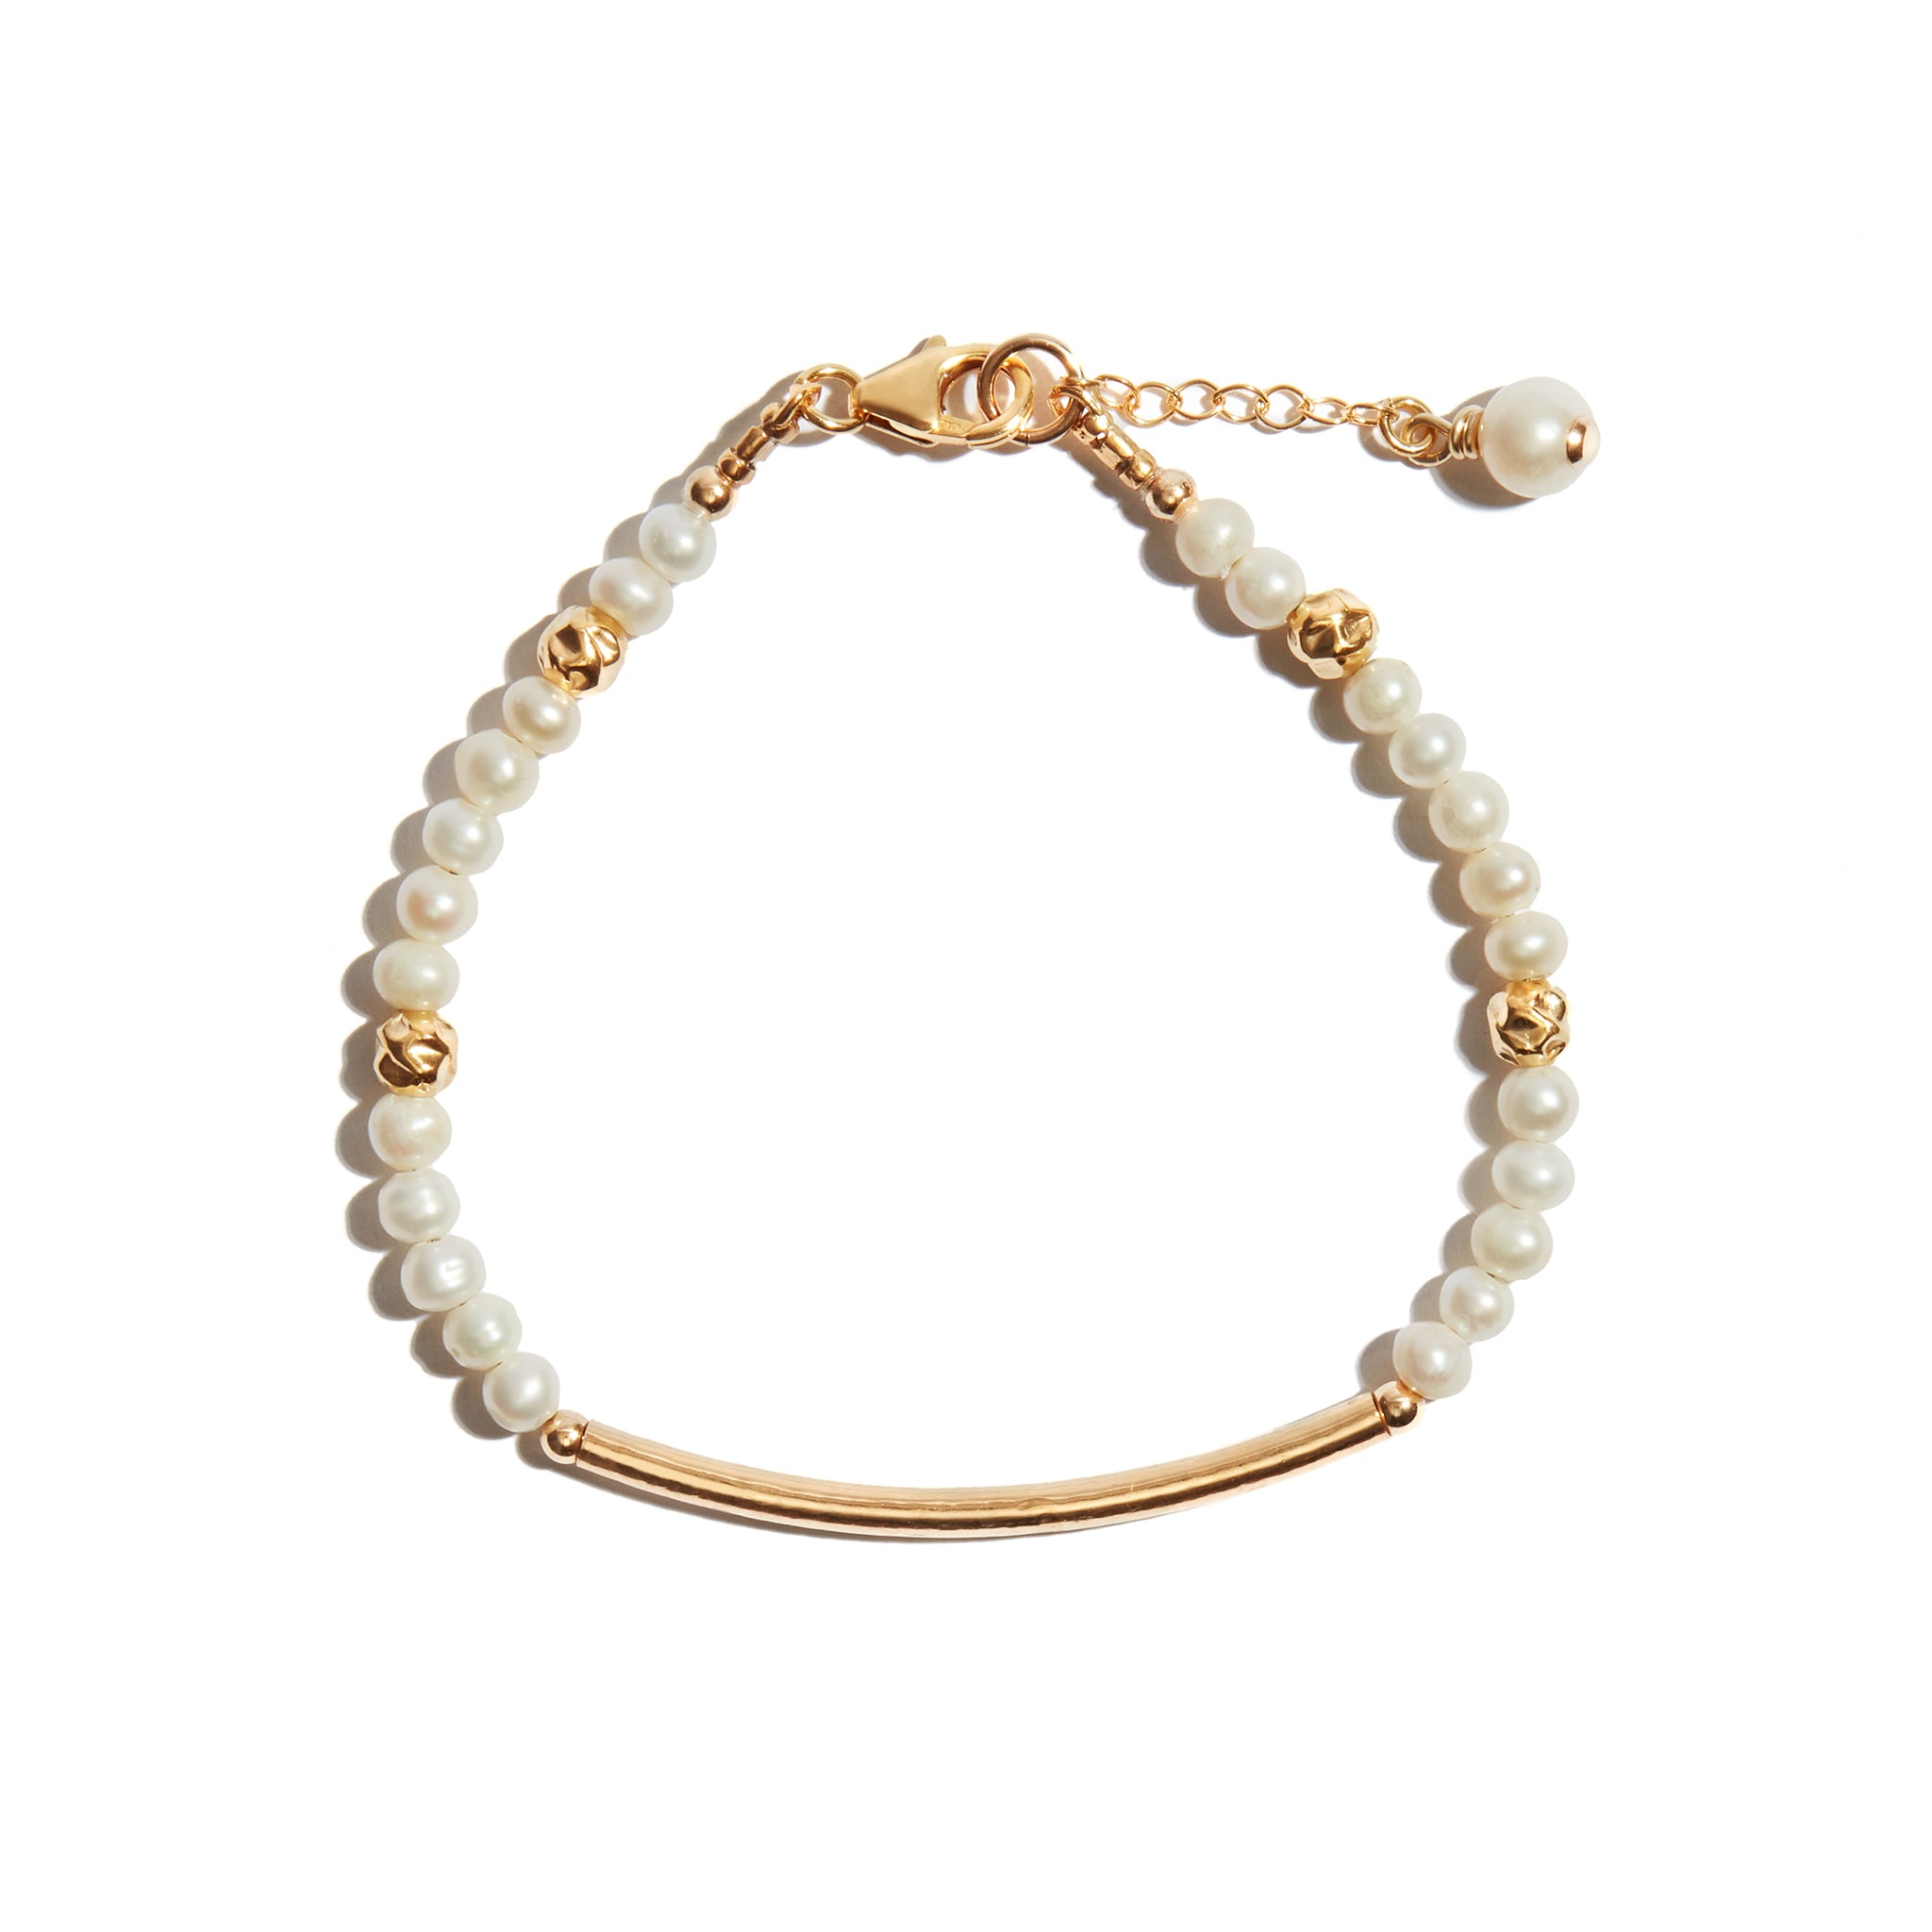 Our Pearl & Gold Bar Bracelet features a thin hammered gold bar, strung with delicate pearls. There is an adjustable chain at the clasp with a single pearl charm. Perfect on its own for a bridal look or simply to add a touch of elegance to your look every day. This bracelet's simple yet beautiful design makes it wonderfully versatile.